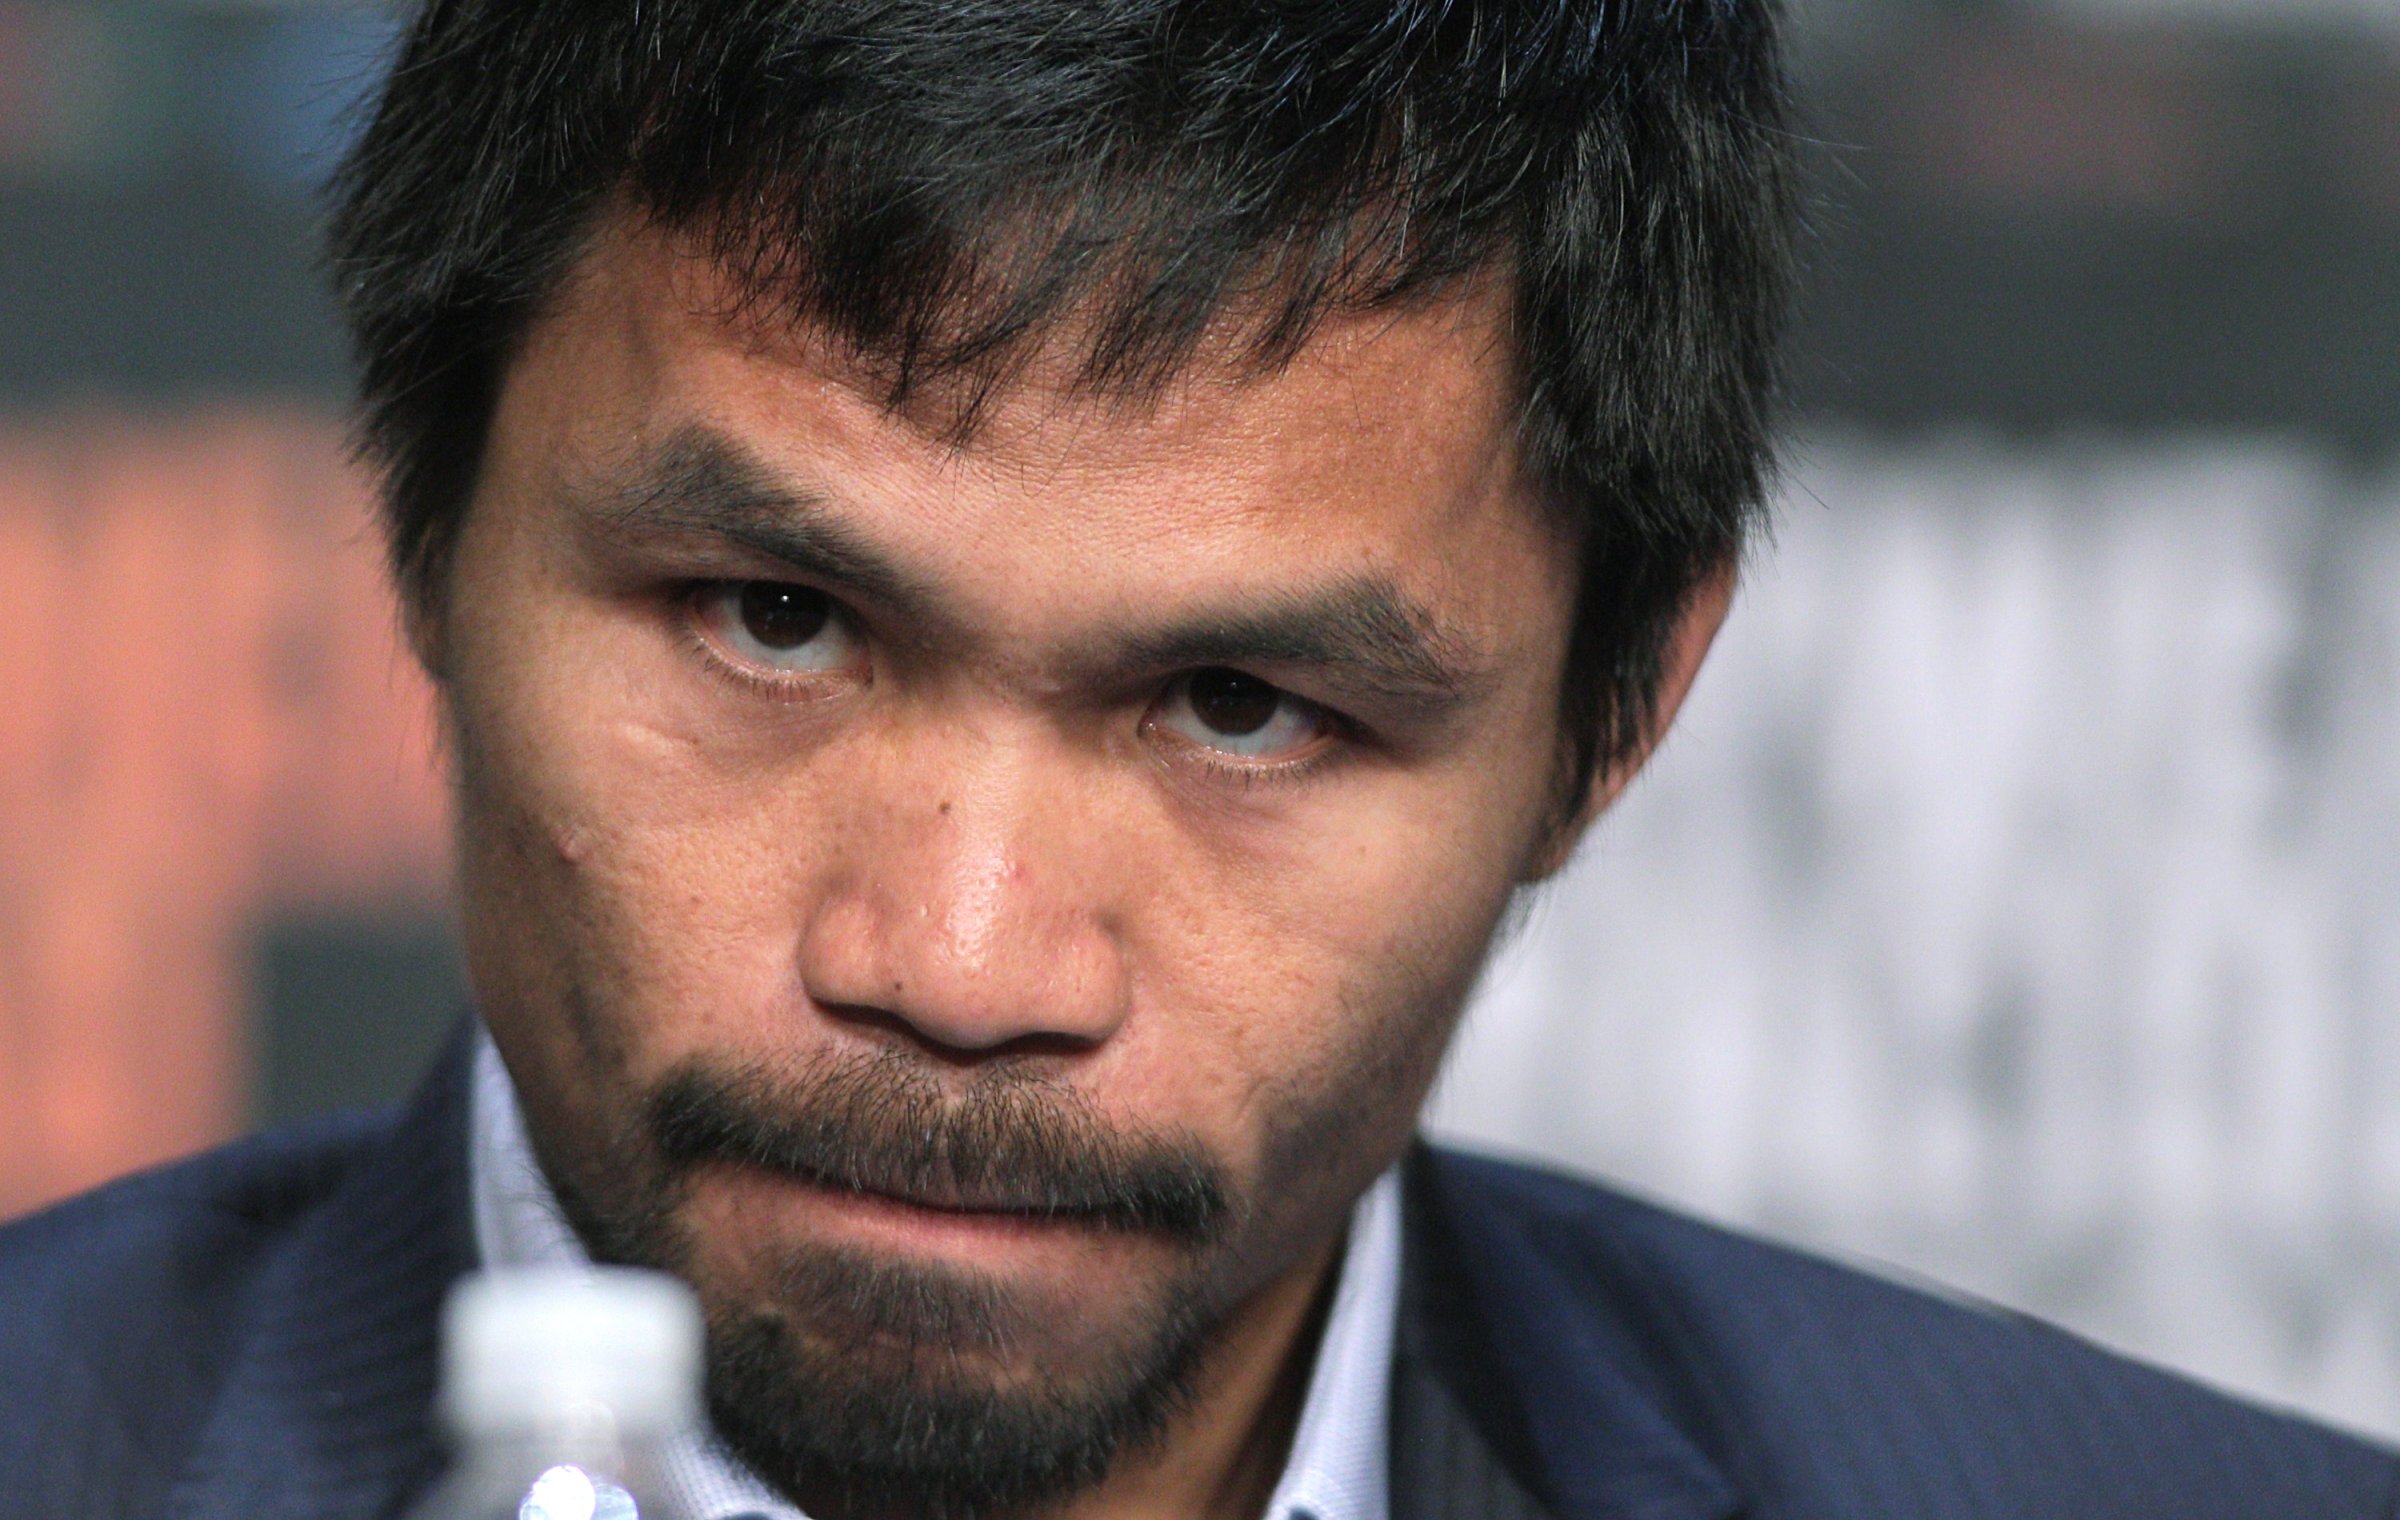 WBO welterweight champion Manny Pacquiao listens during a news conference at the KA Theatre at MGM Grand Hotel & Casino in Las Vegas, April 29, 2015.